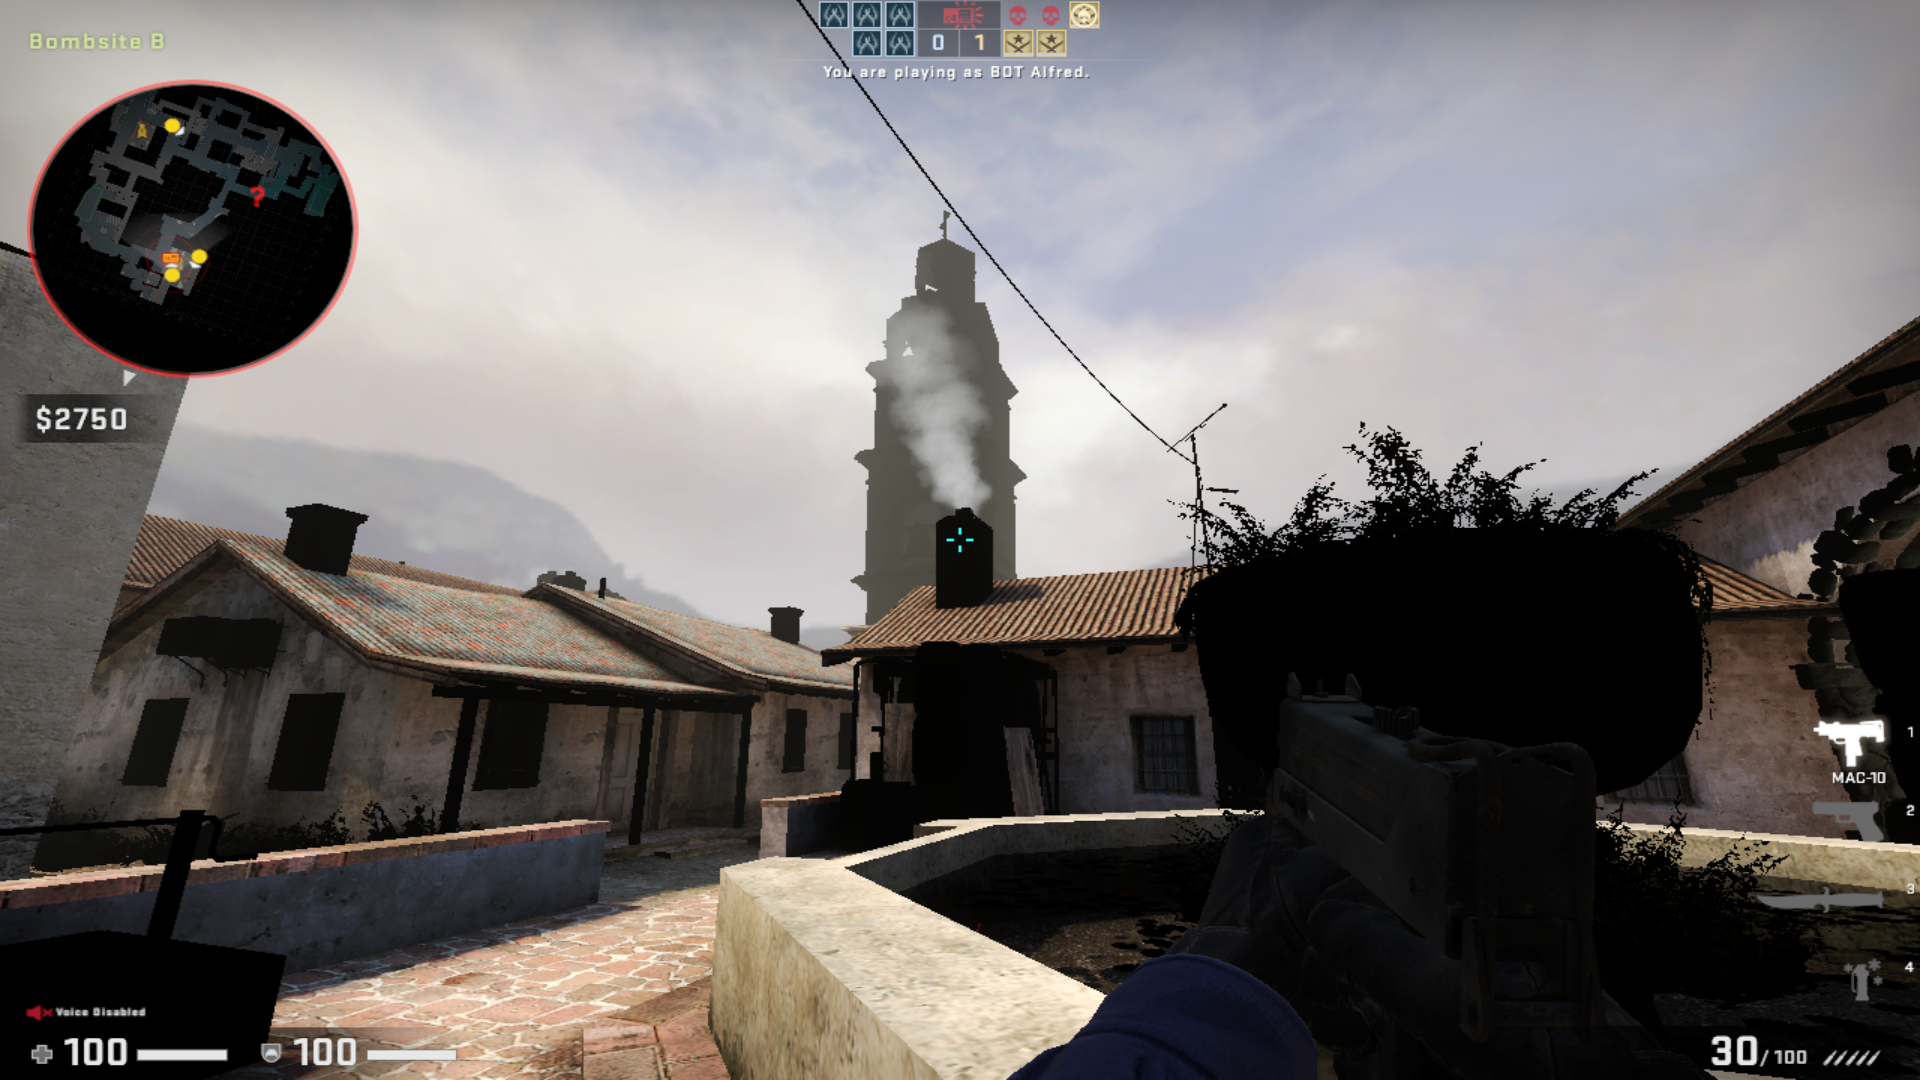 de_inferno with some black objects